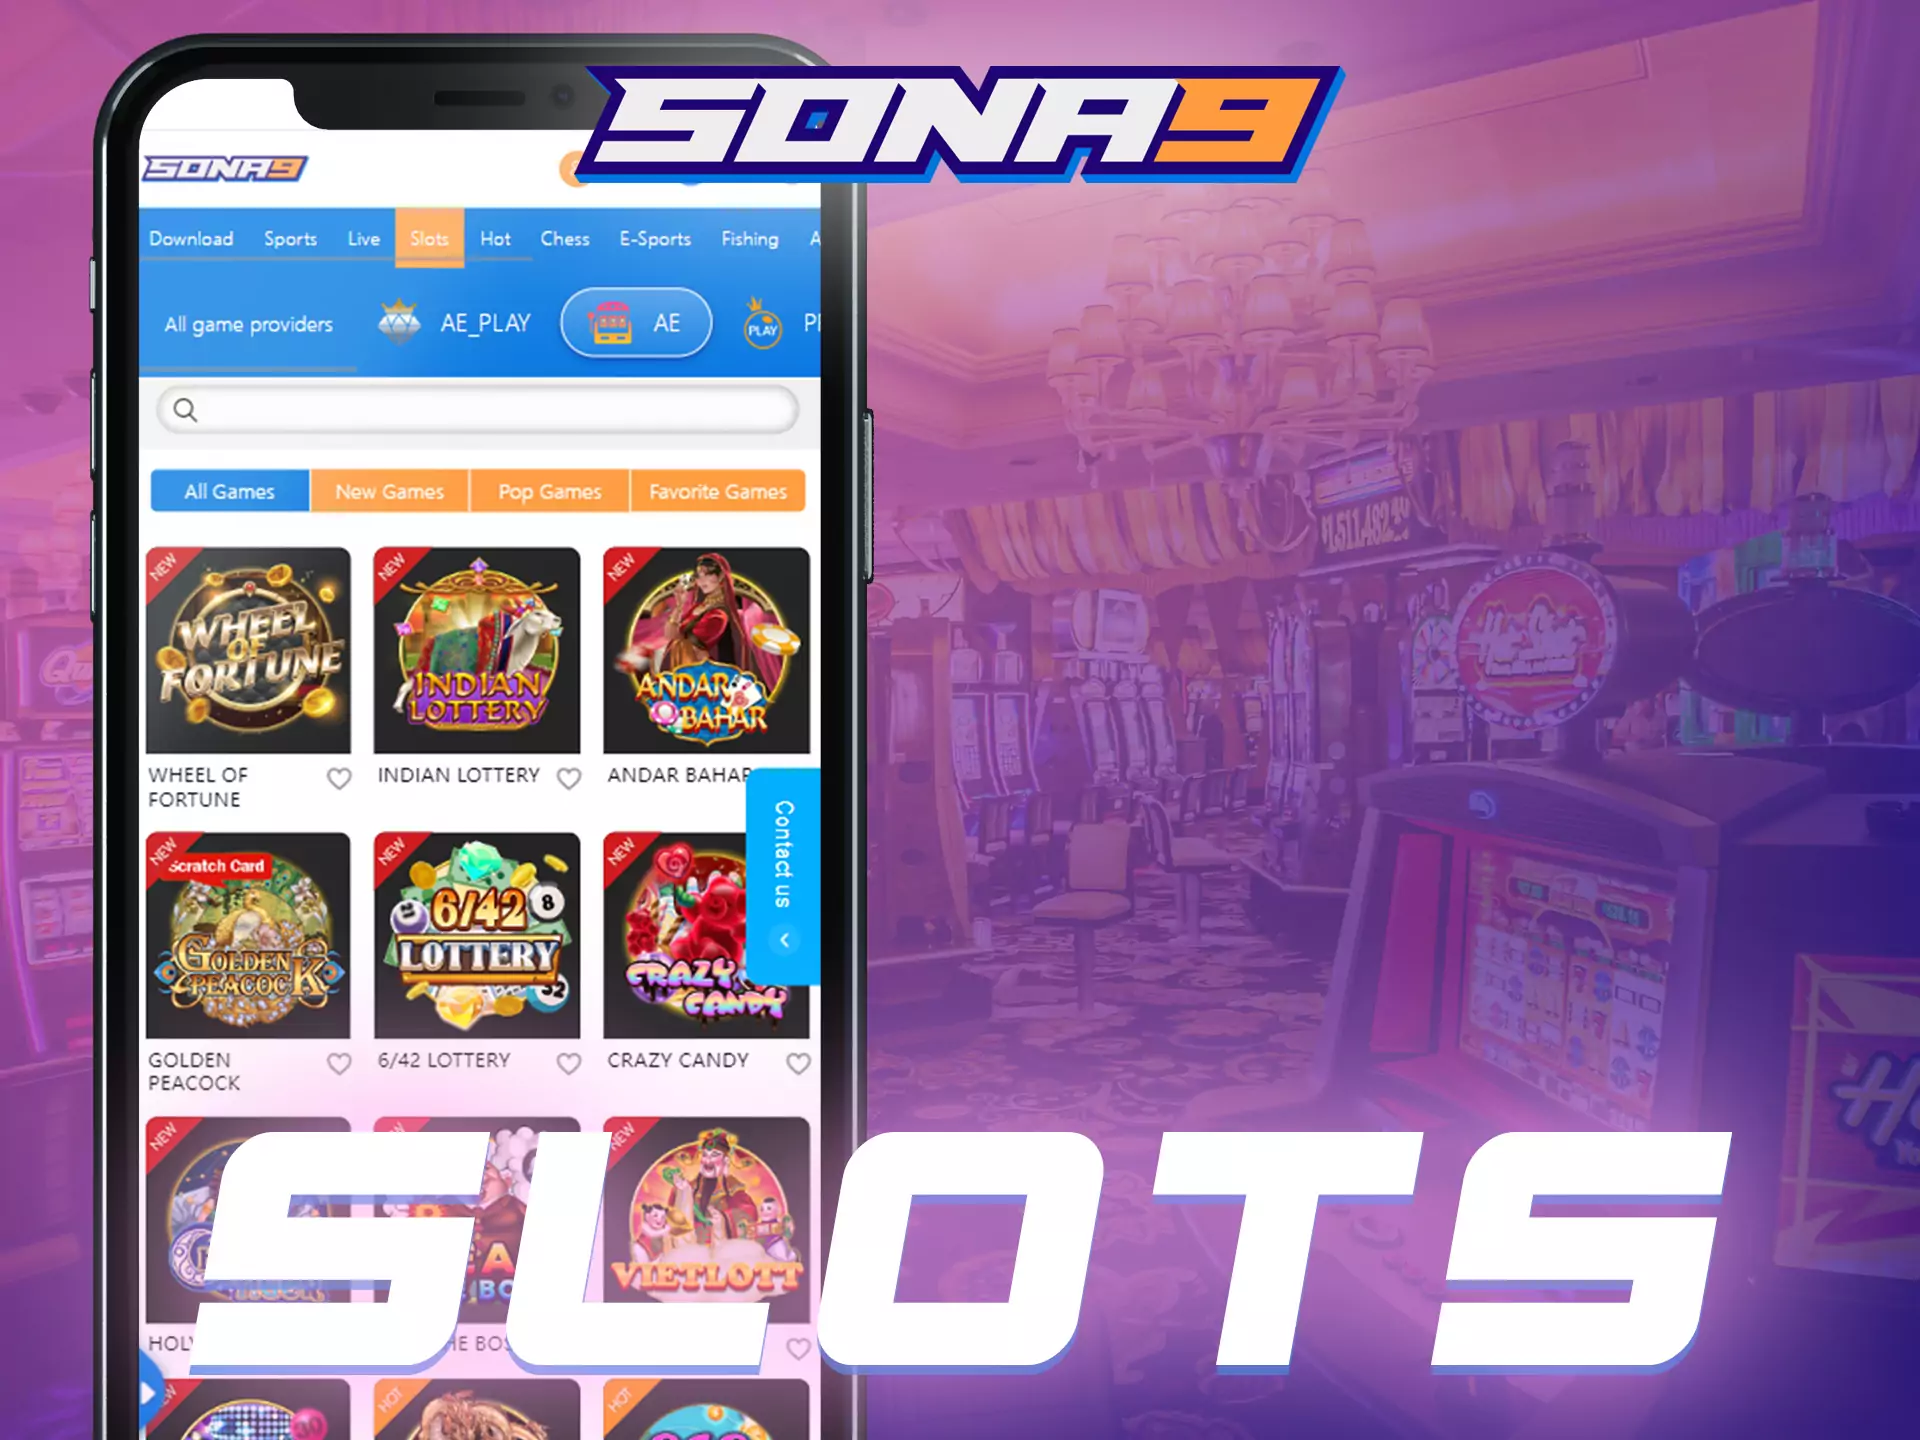 Besides table games and sports betting, there are lots of slots in the Sona9 app.